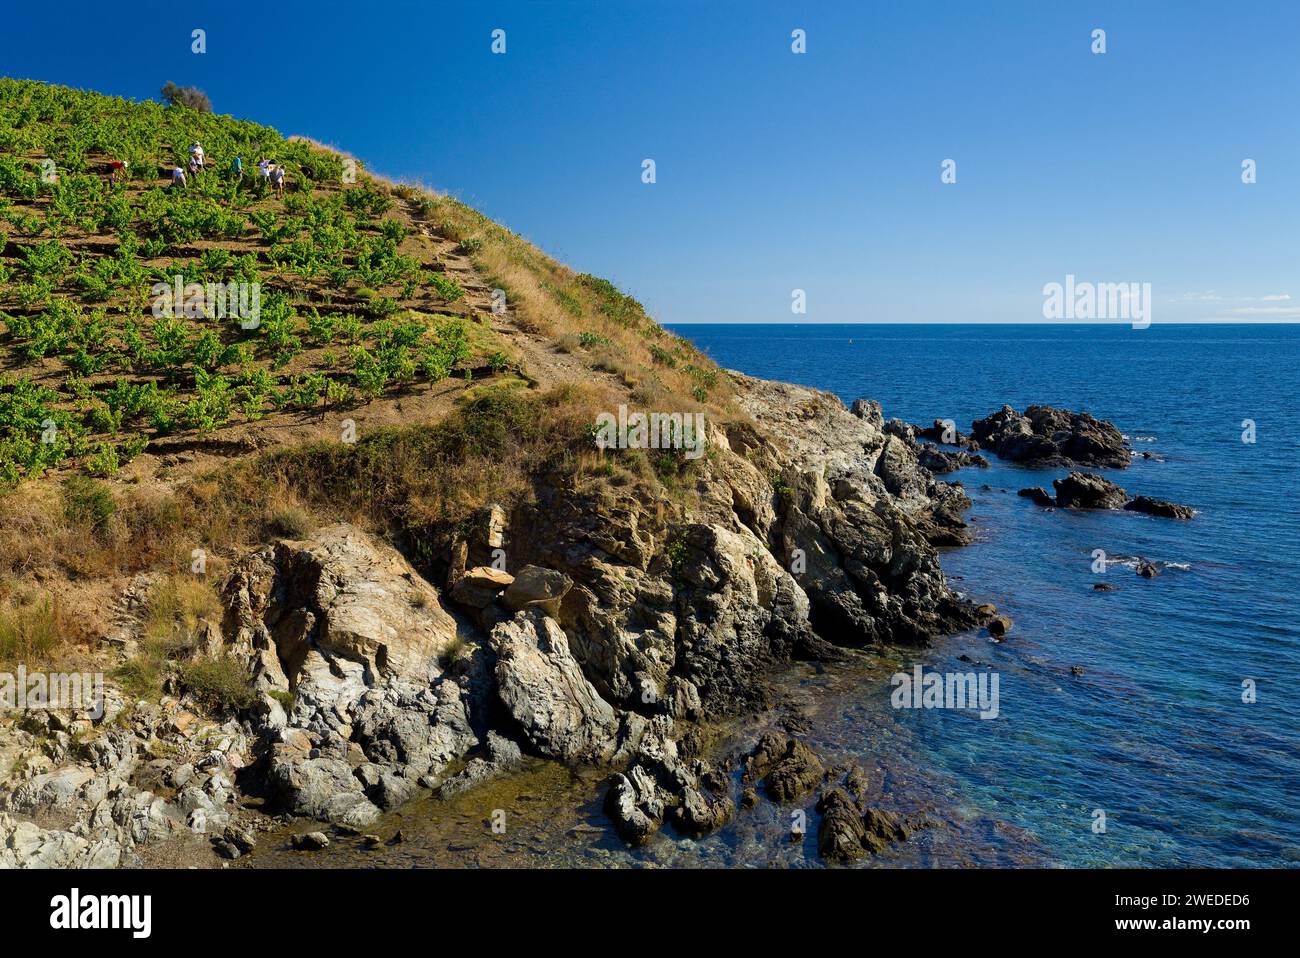 FRANCE. PYRENEES ORIENTALES (66) BANYULS-SUR-MER. HARVEST SEASON ON THE SHORES OF THE MEDITERRANEAN SEA Stock Photo